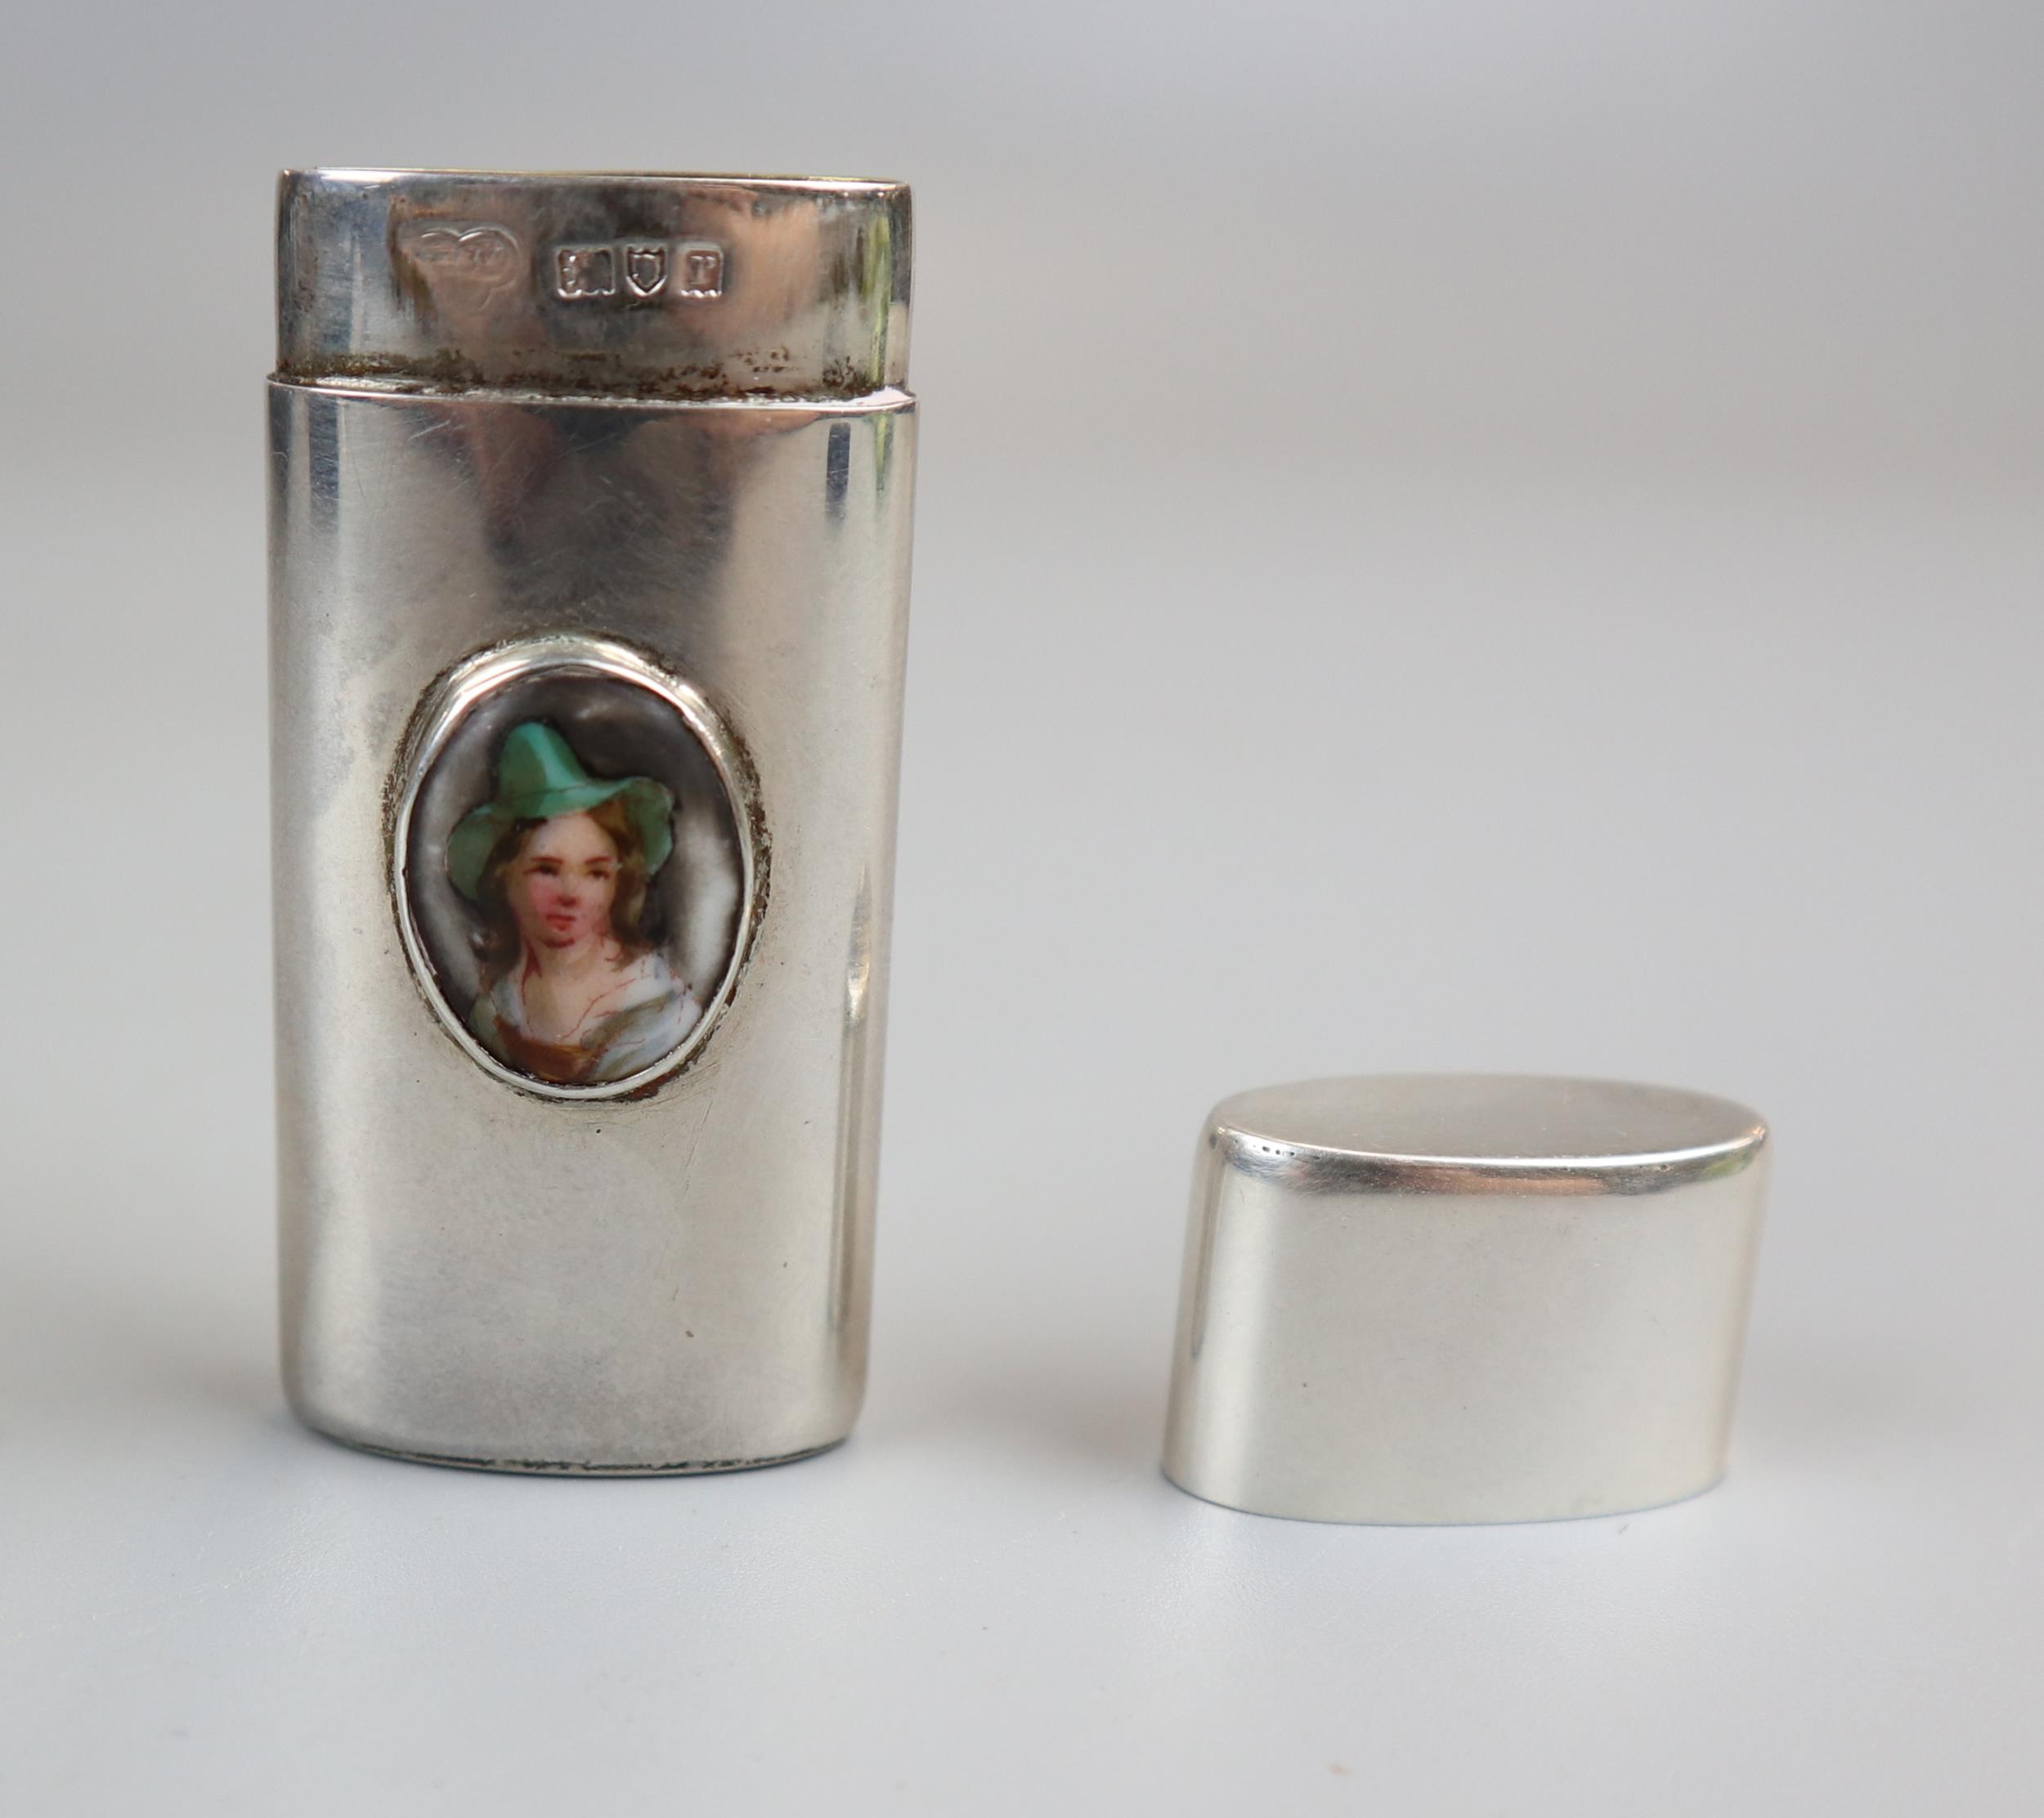 Hallmarked silver pin case with enamel portrait of lady - Makers mark G&S Co LTD - Image 2 of 3